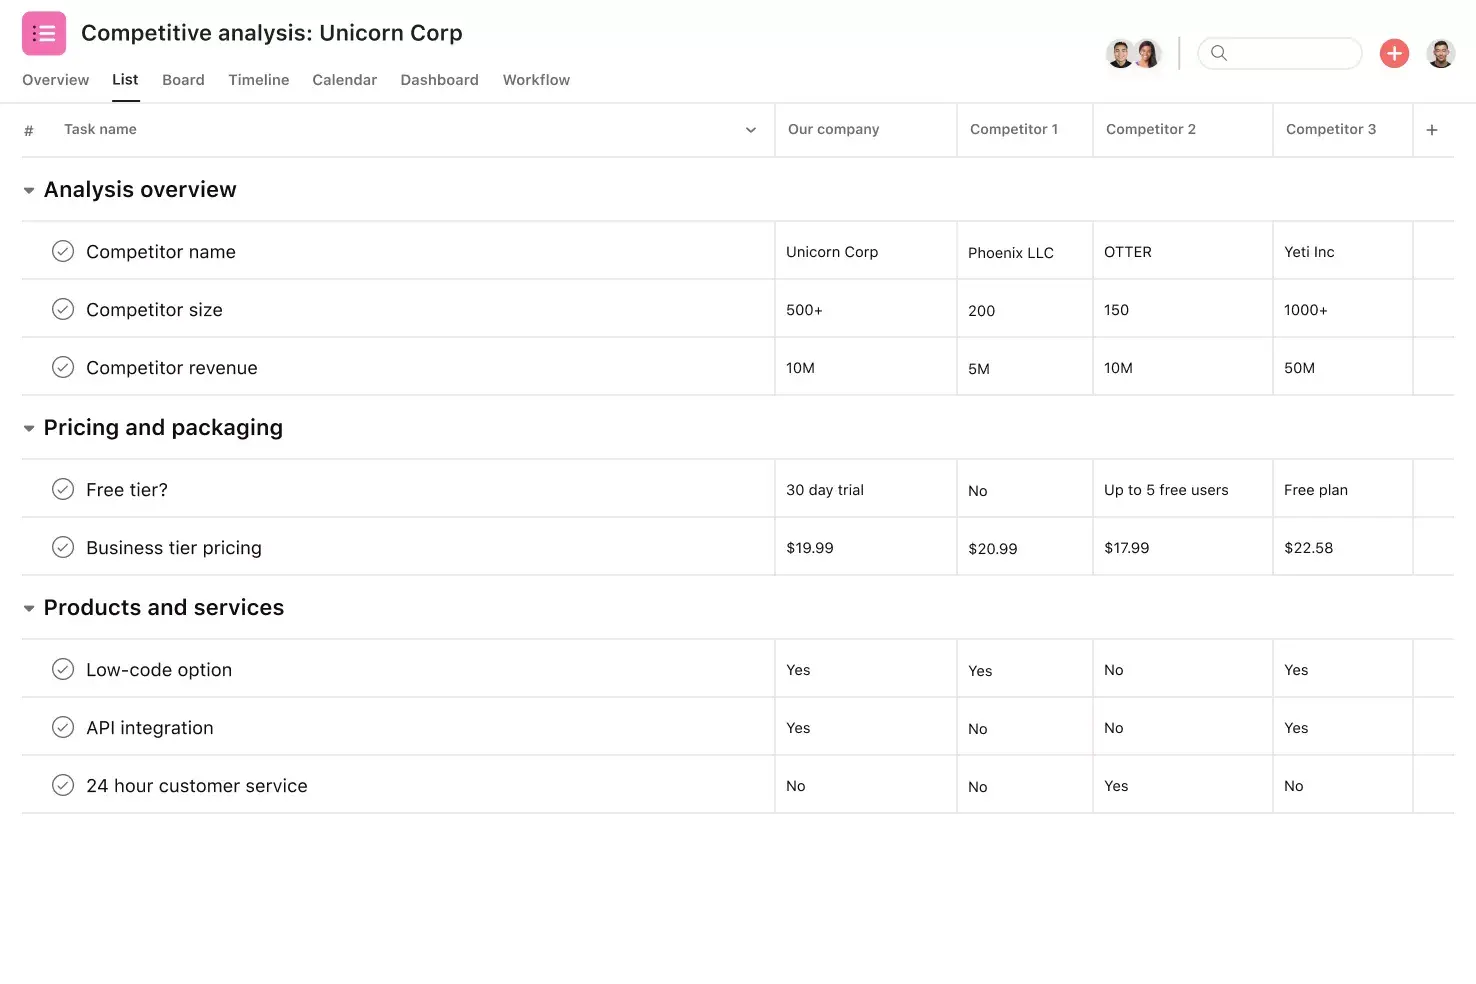 [Product ui] Competitive analysis project in Asana, spreadsheet-style project view (List)